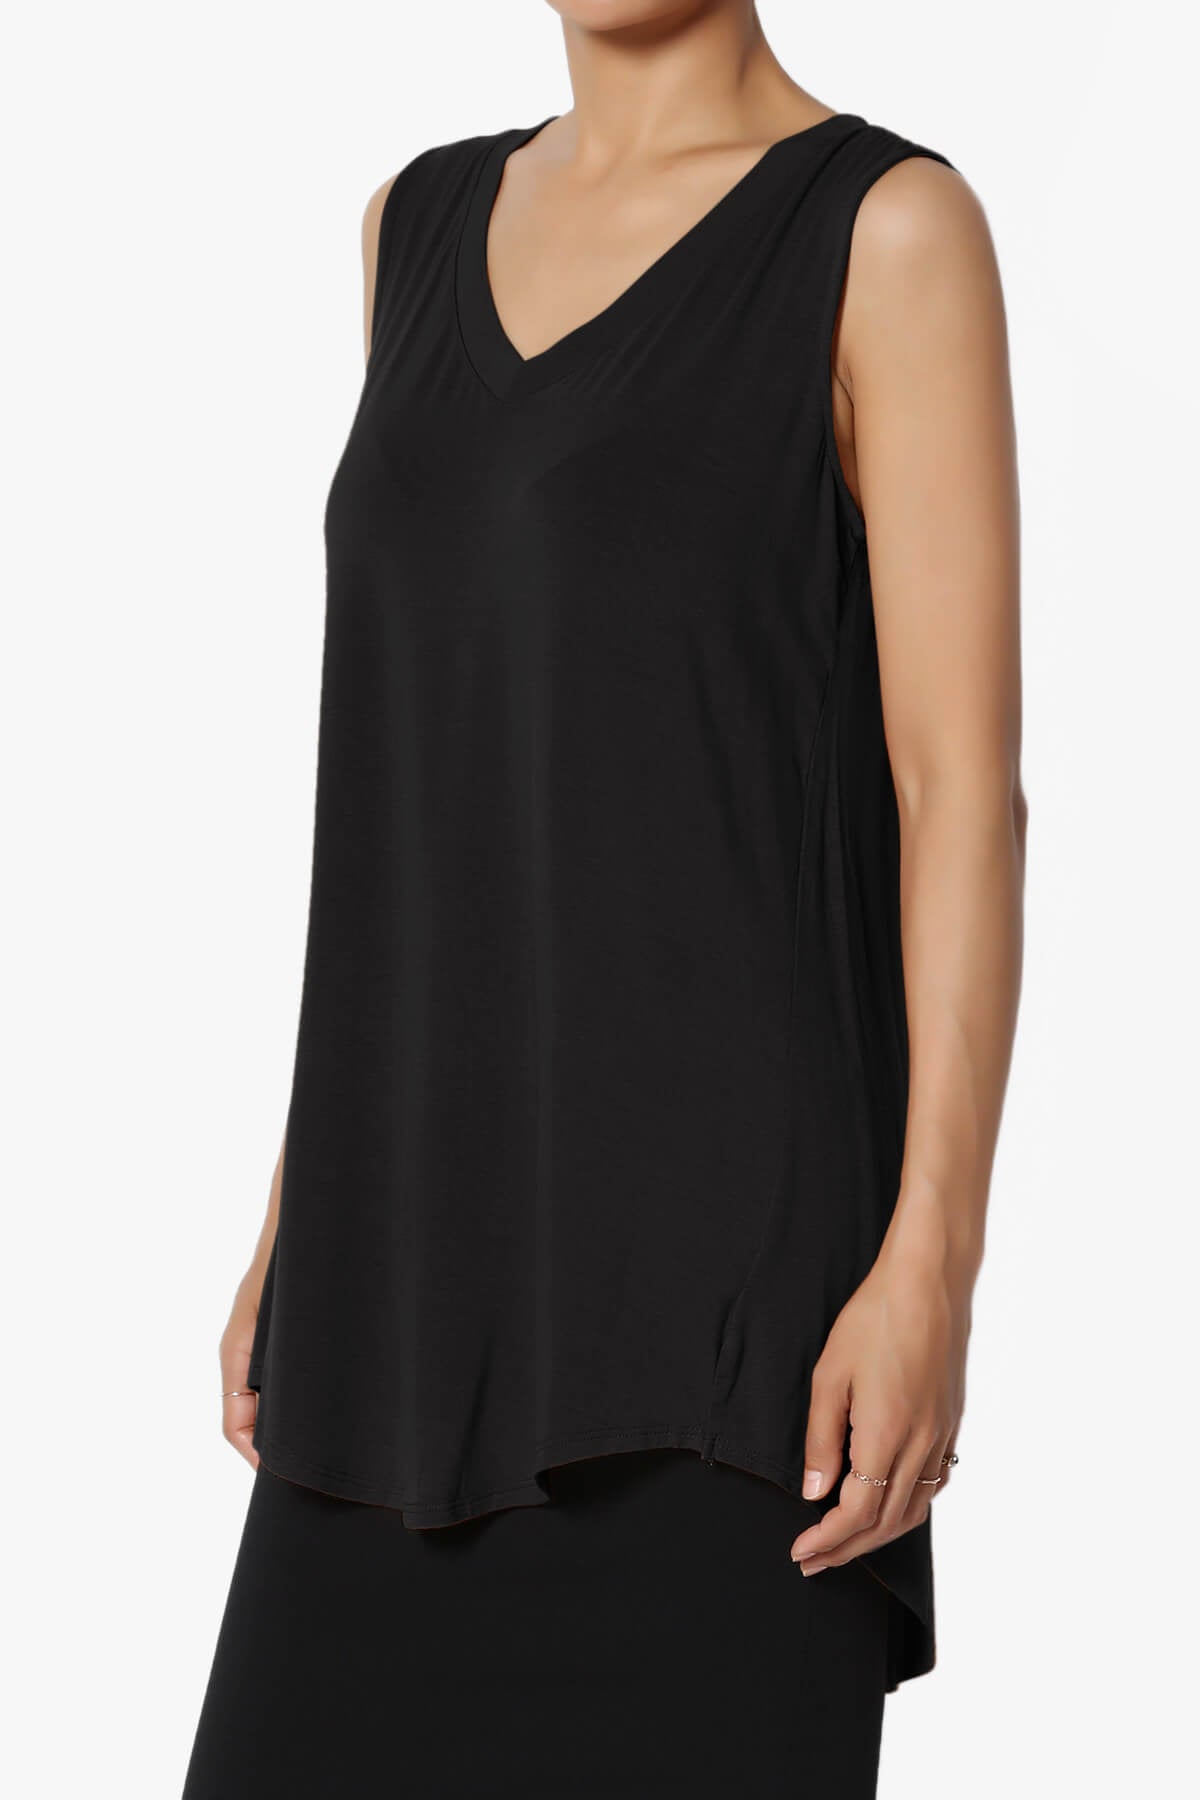 Load image into Gallery viewer, Myles Sleeveless V-Neck Luxe Jersey Top BLACK_3
